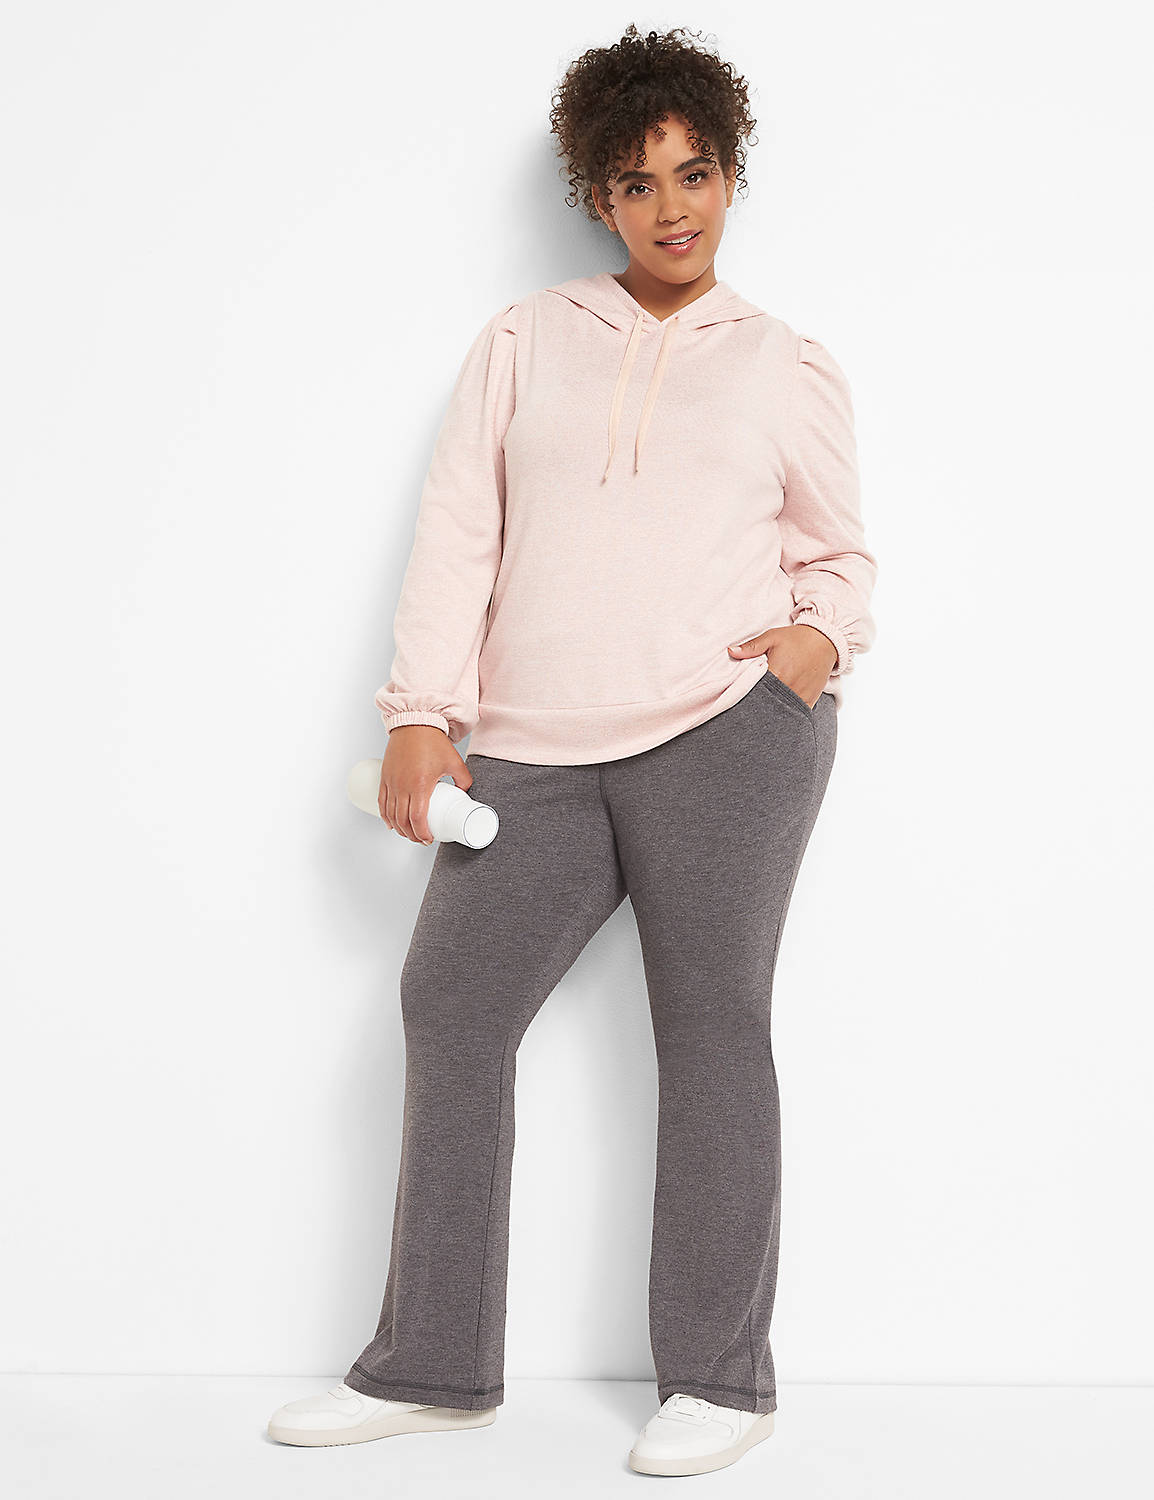 LIVI French Terry Boot Pant Product Image 3